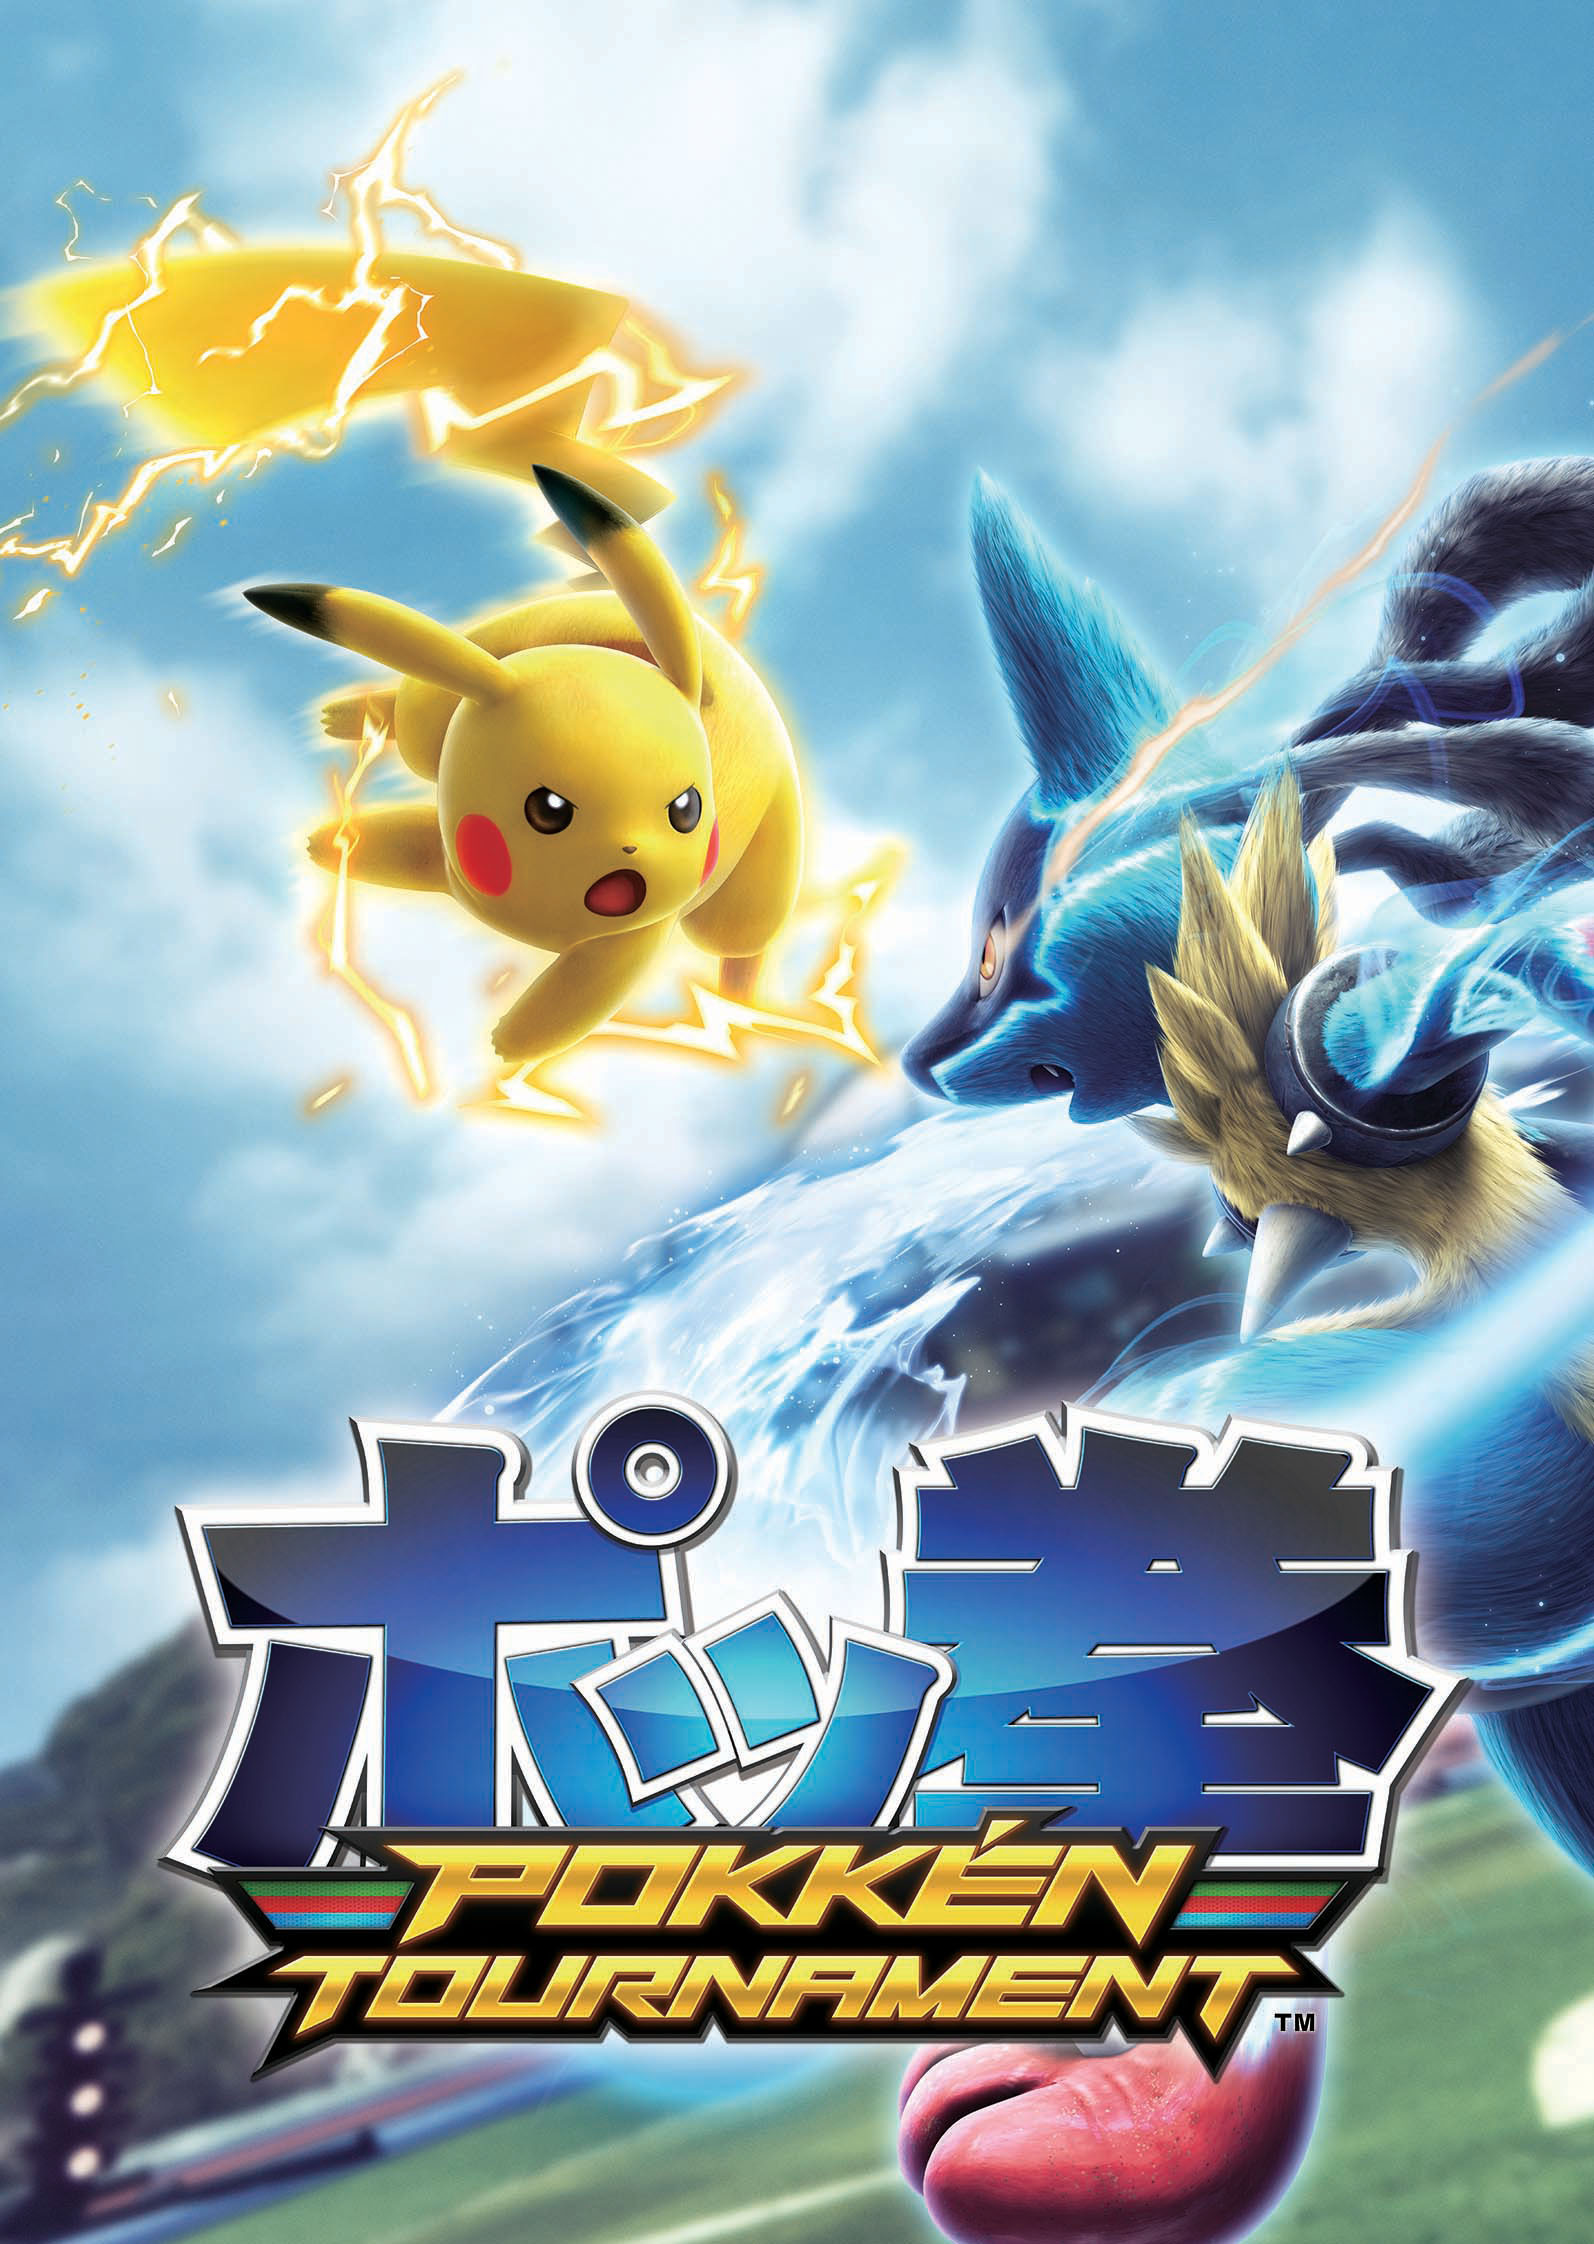 Continuar en cualquier momento probable CORRECTING and REPLACING Nintendo News: Pokkén Tournament Launches  Exclusively for Wii U on March 18 | Business Wire